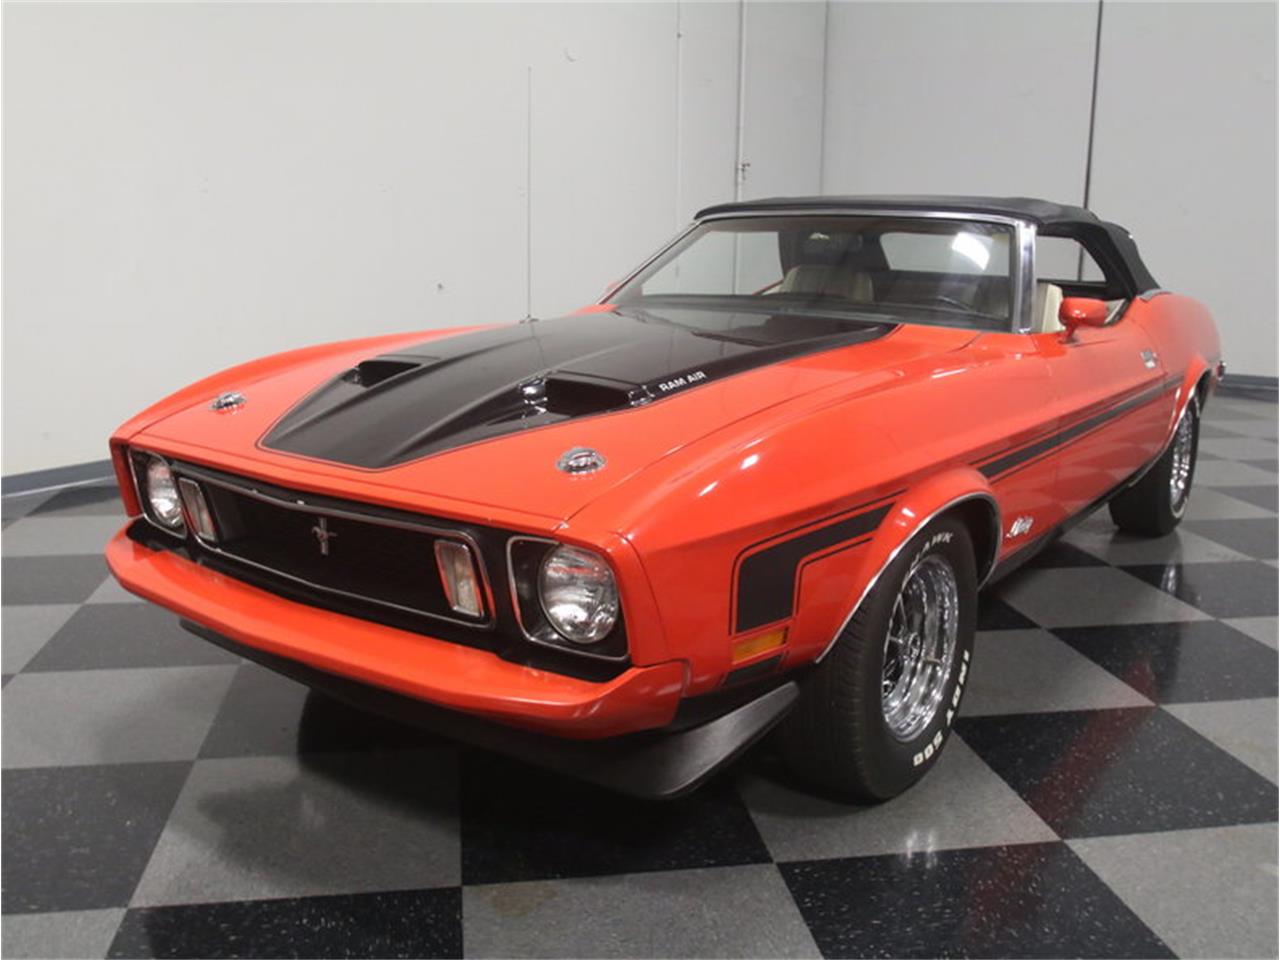 1973 Ford Mustang 351 Cobra Jet for Sale | ClassicCars.com | CC-993827